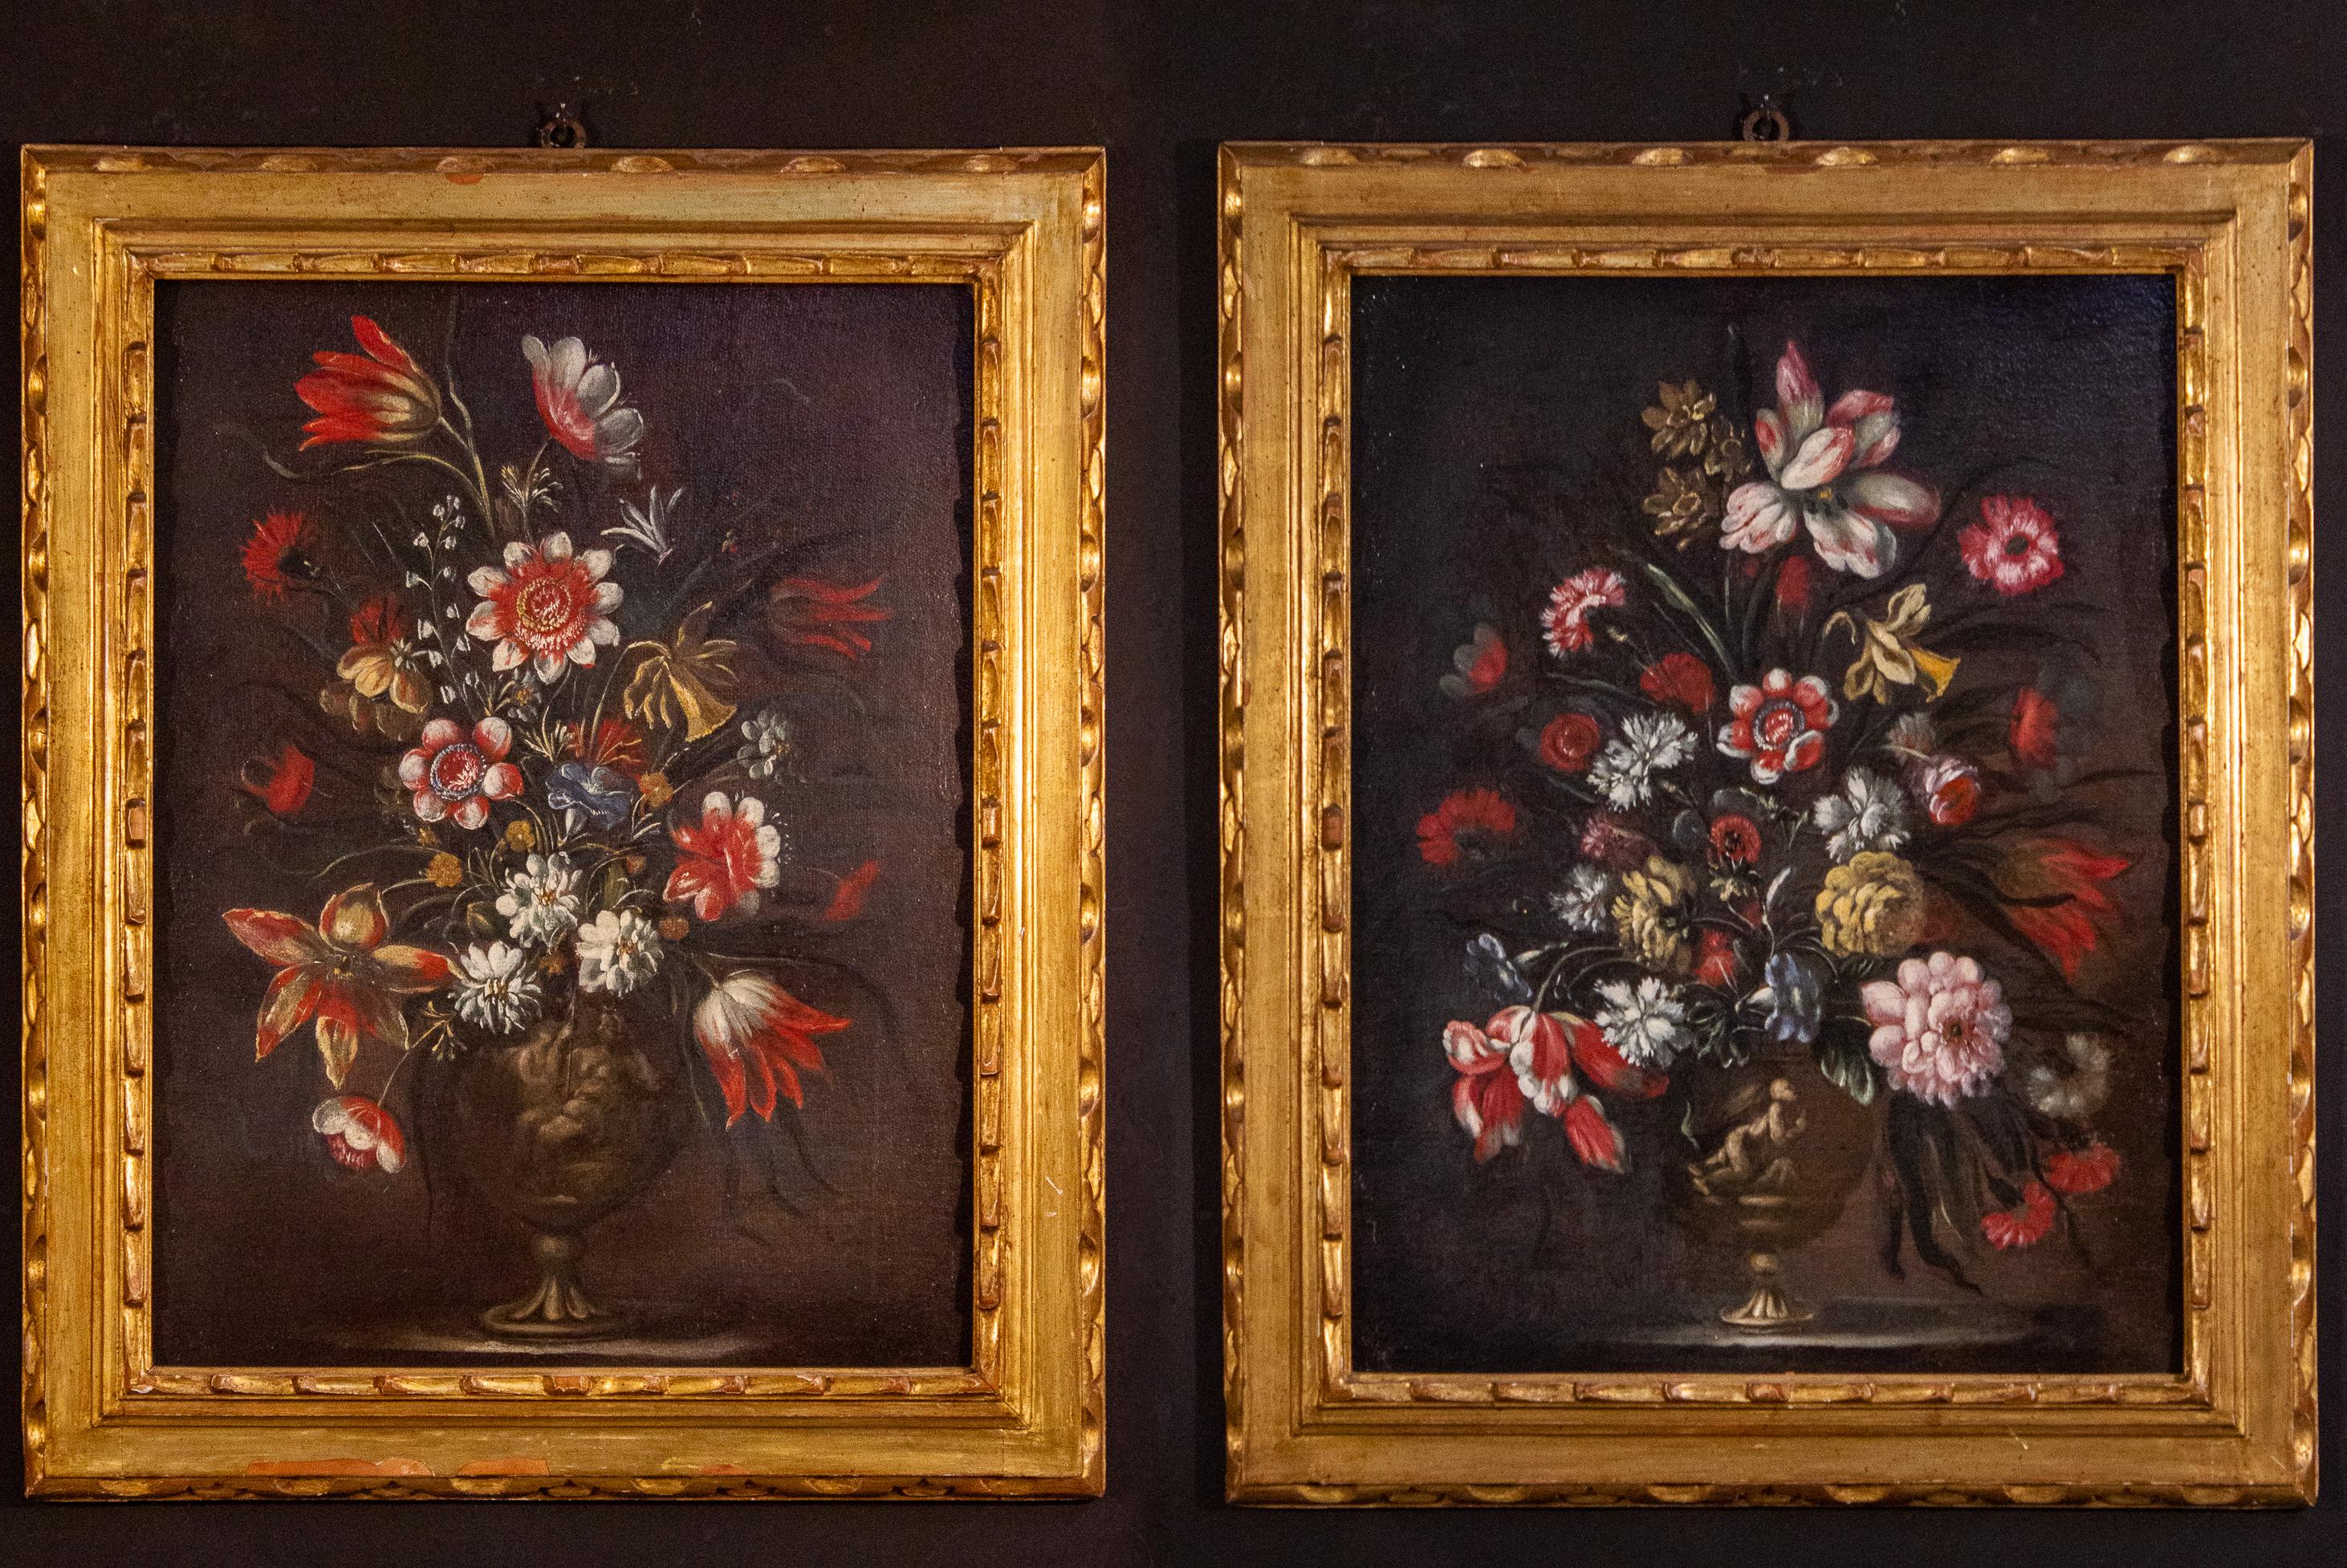 Pair of very decorative Italian Still-life paintings of flowers with vases and classical figures .
18th century, oil on canvas,  with original gilt-wood frames. 
This pair is an excellent example of the Italian  trend of emulating the Flemish still